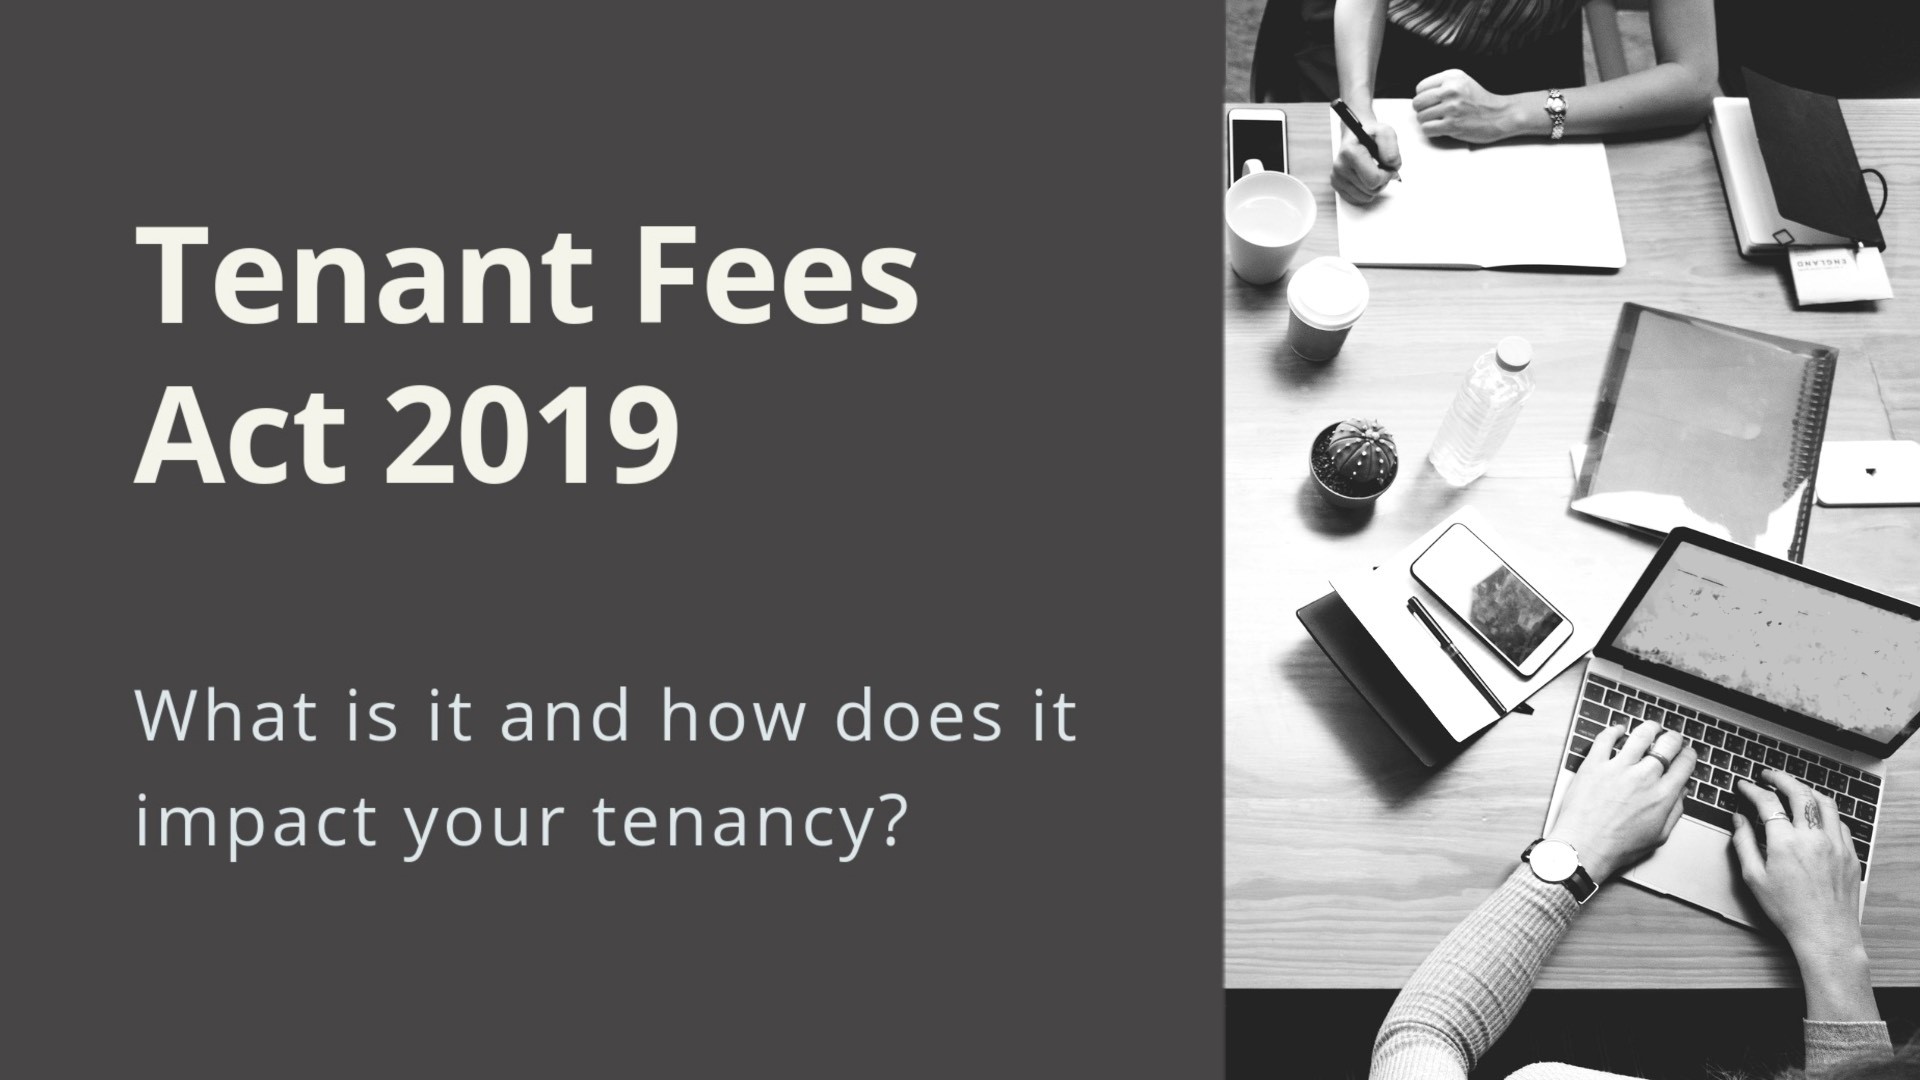 Tenant Fees Act 2019 - Whats going to change?